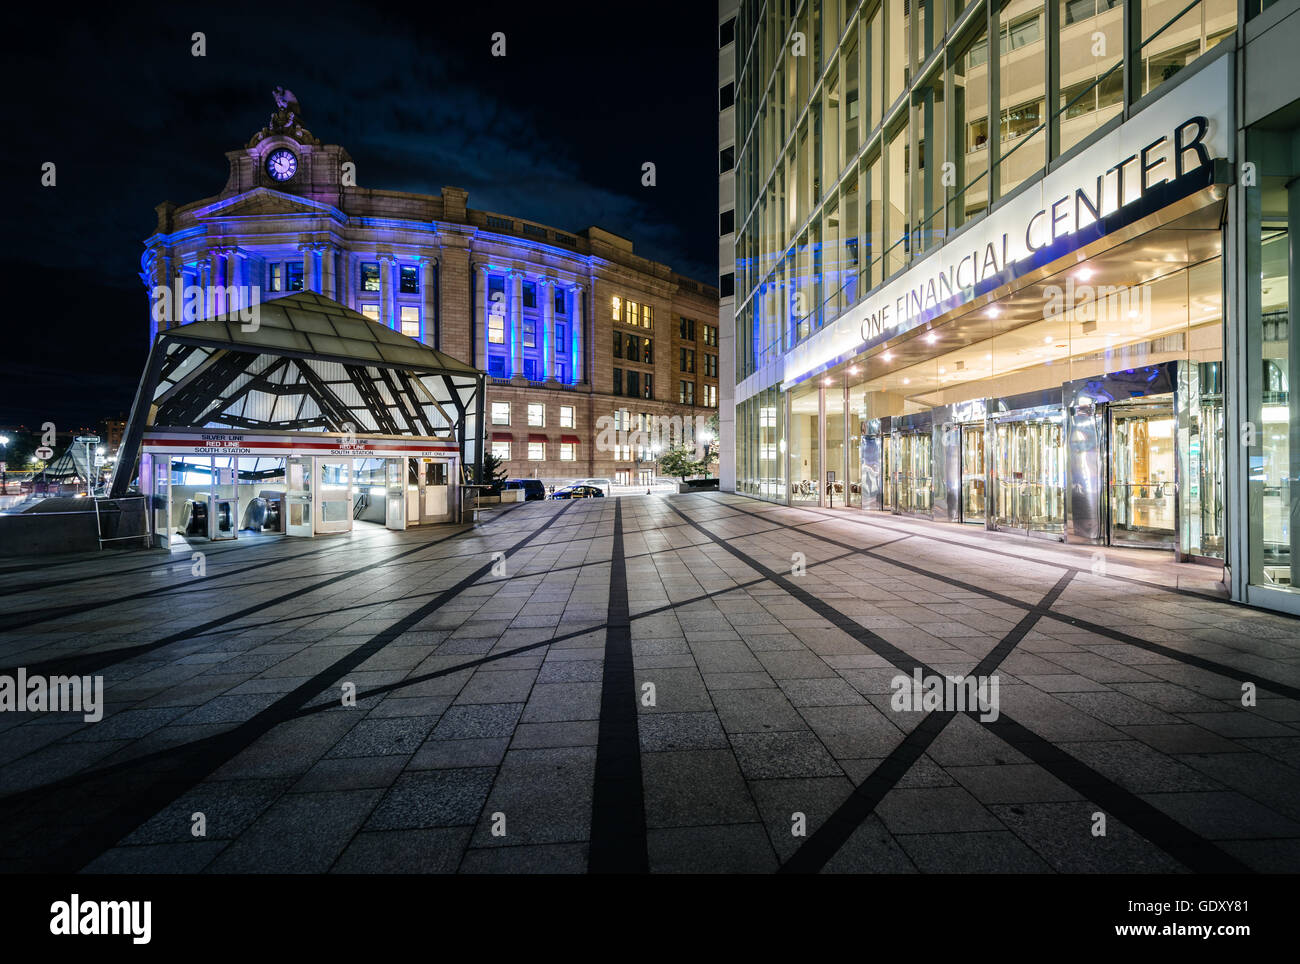 One Financial Center and the South Station at night, in the Financial District, Boston, Massachusetts. Stock Photo